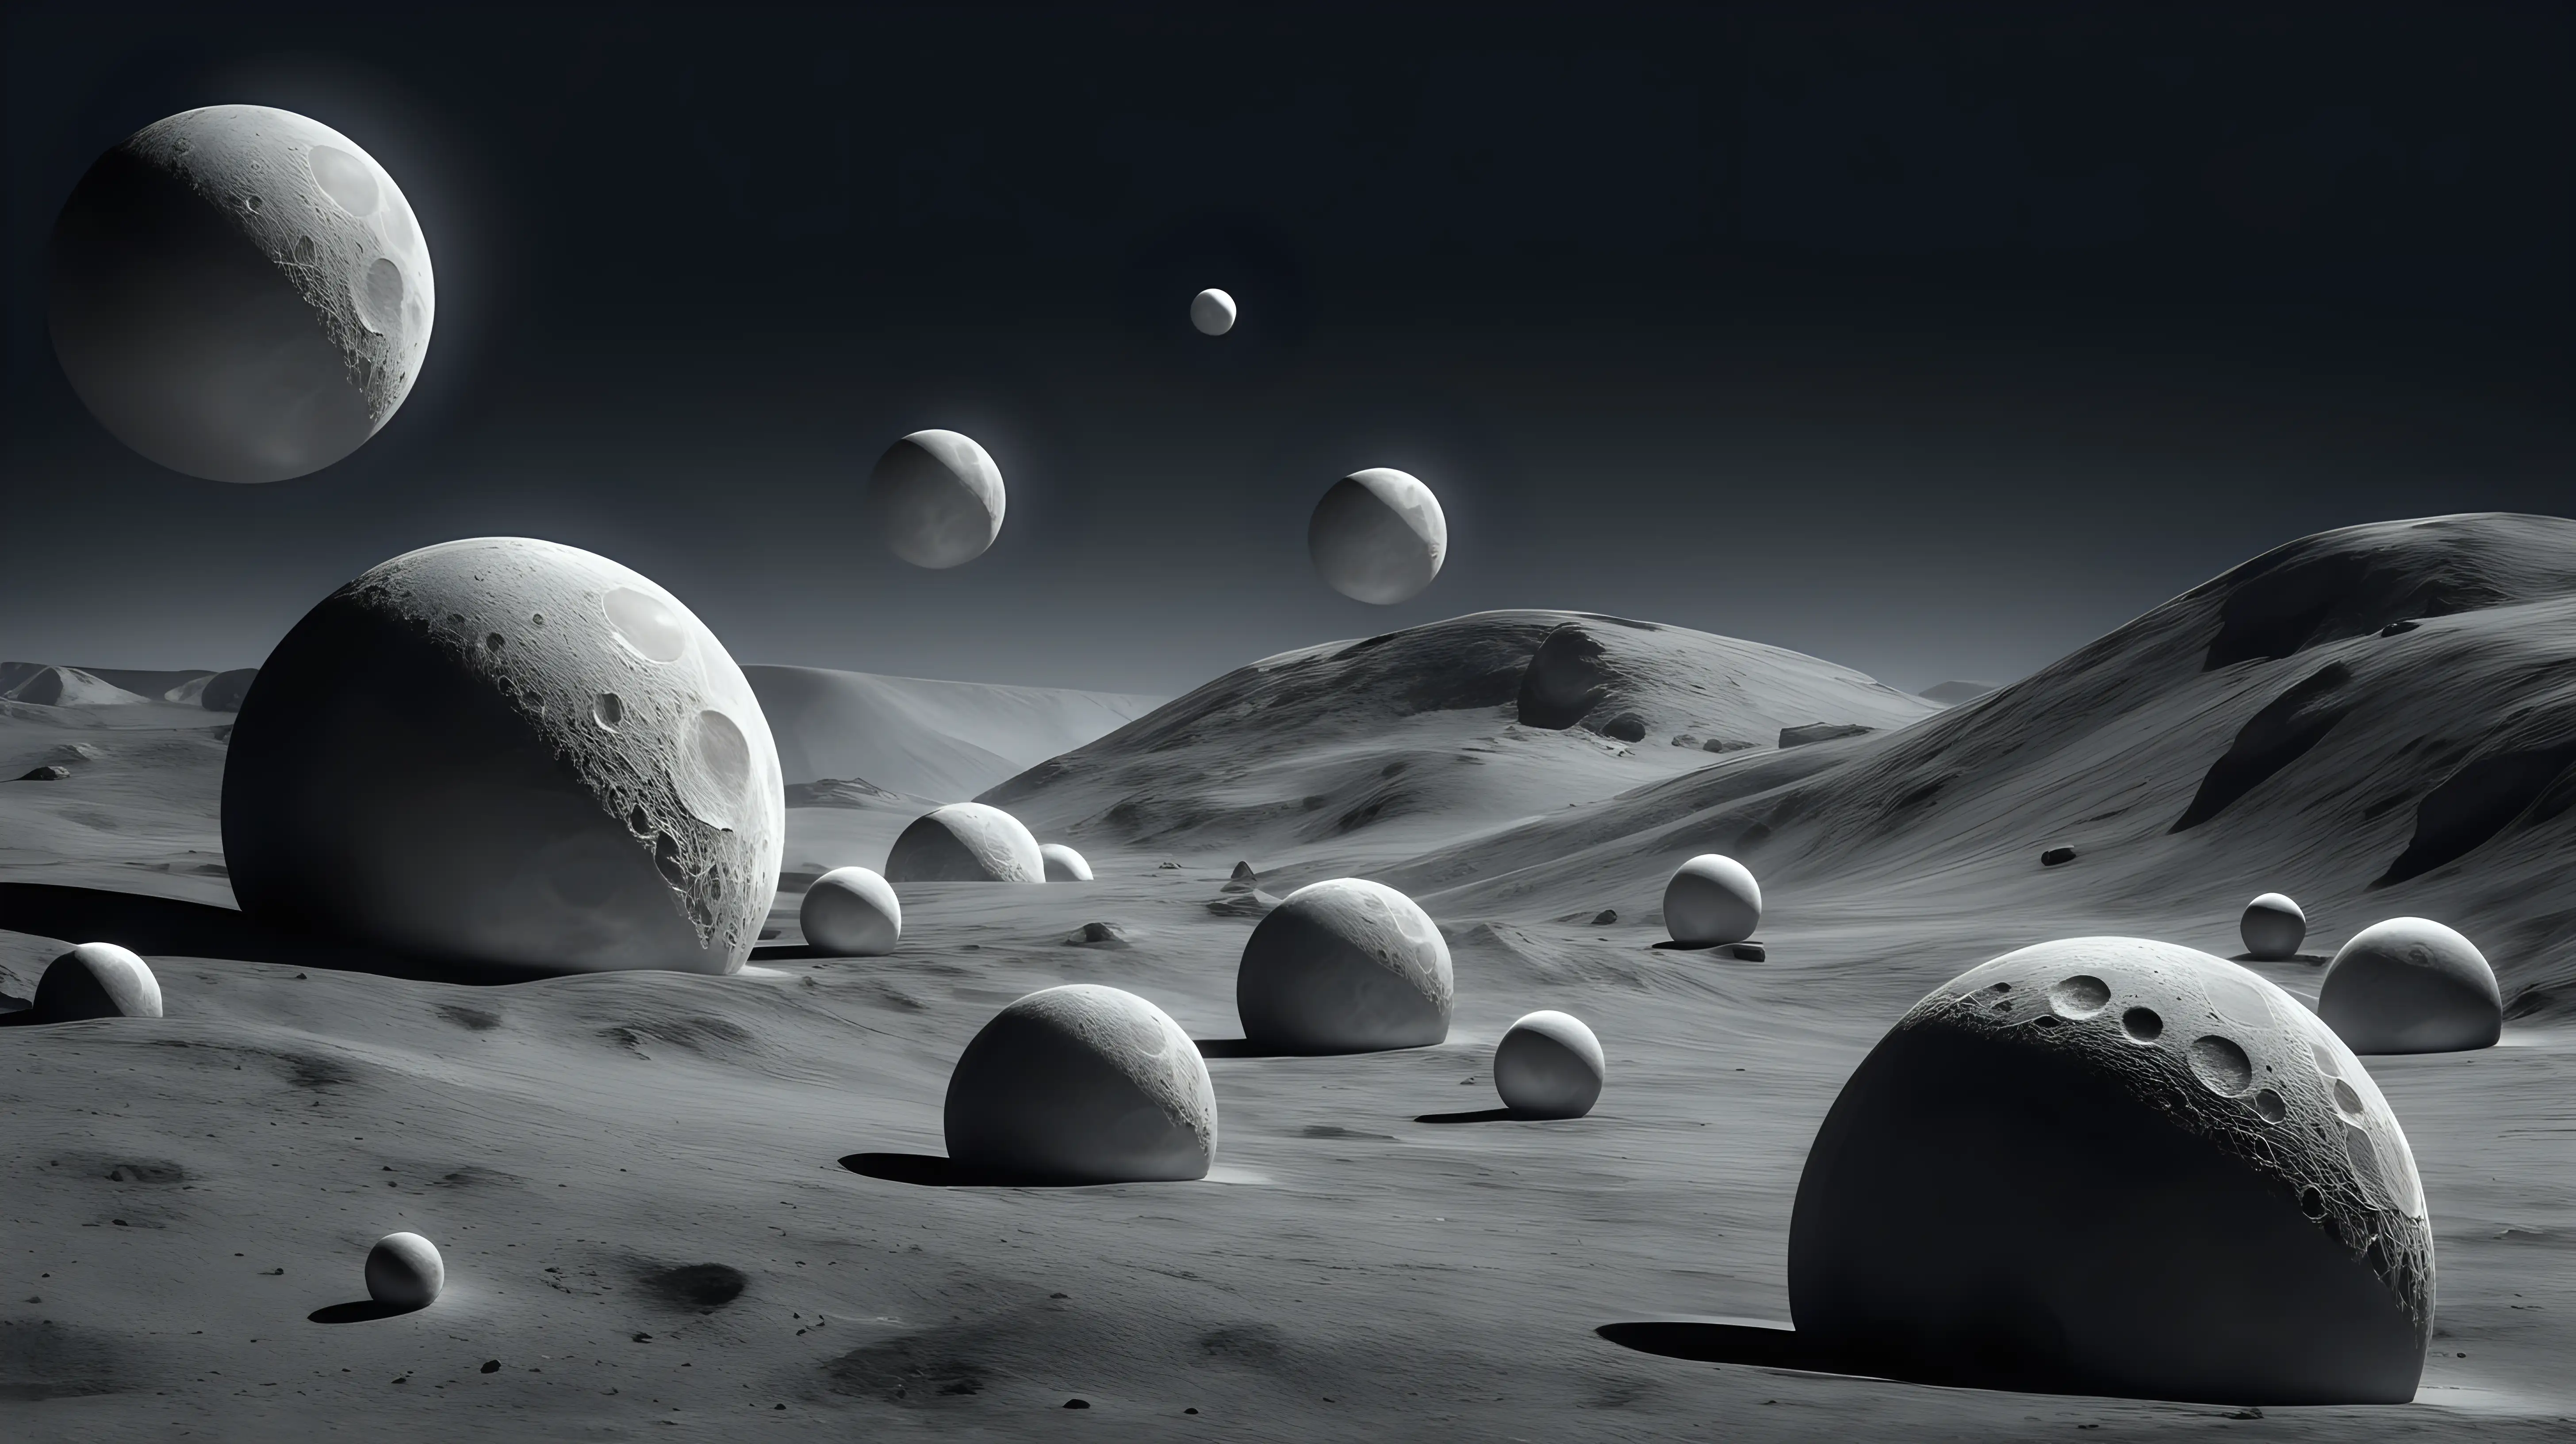 Lunar Landscape: Arrange the spheres to resemble a lunar landscape, creating a scene that evokes the serenity and mystique of the moon's surface.